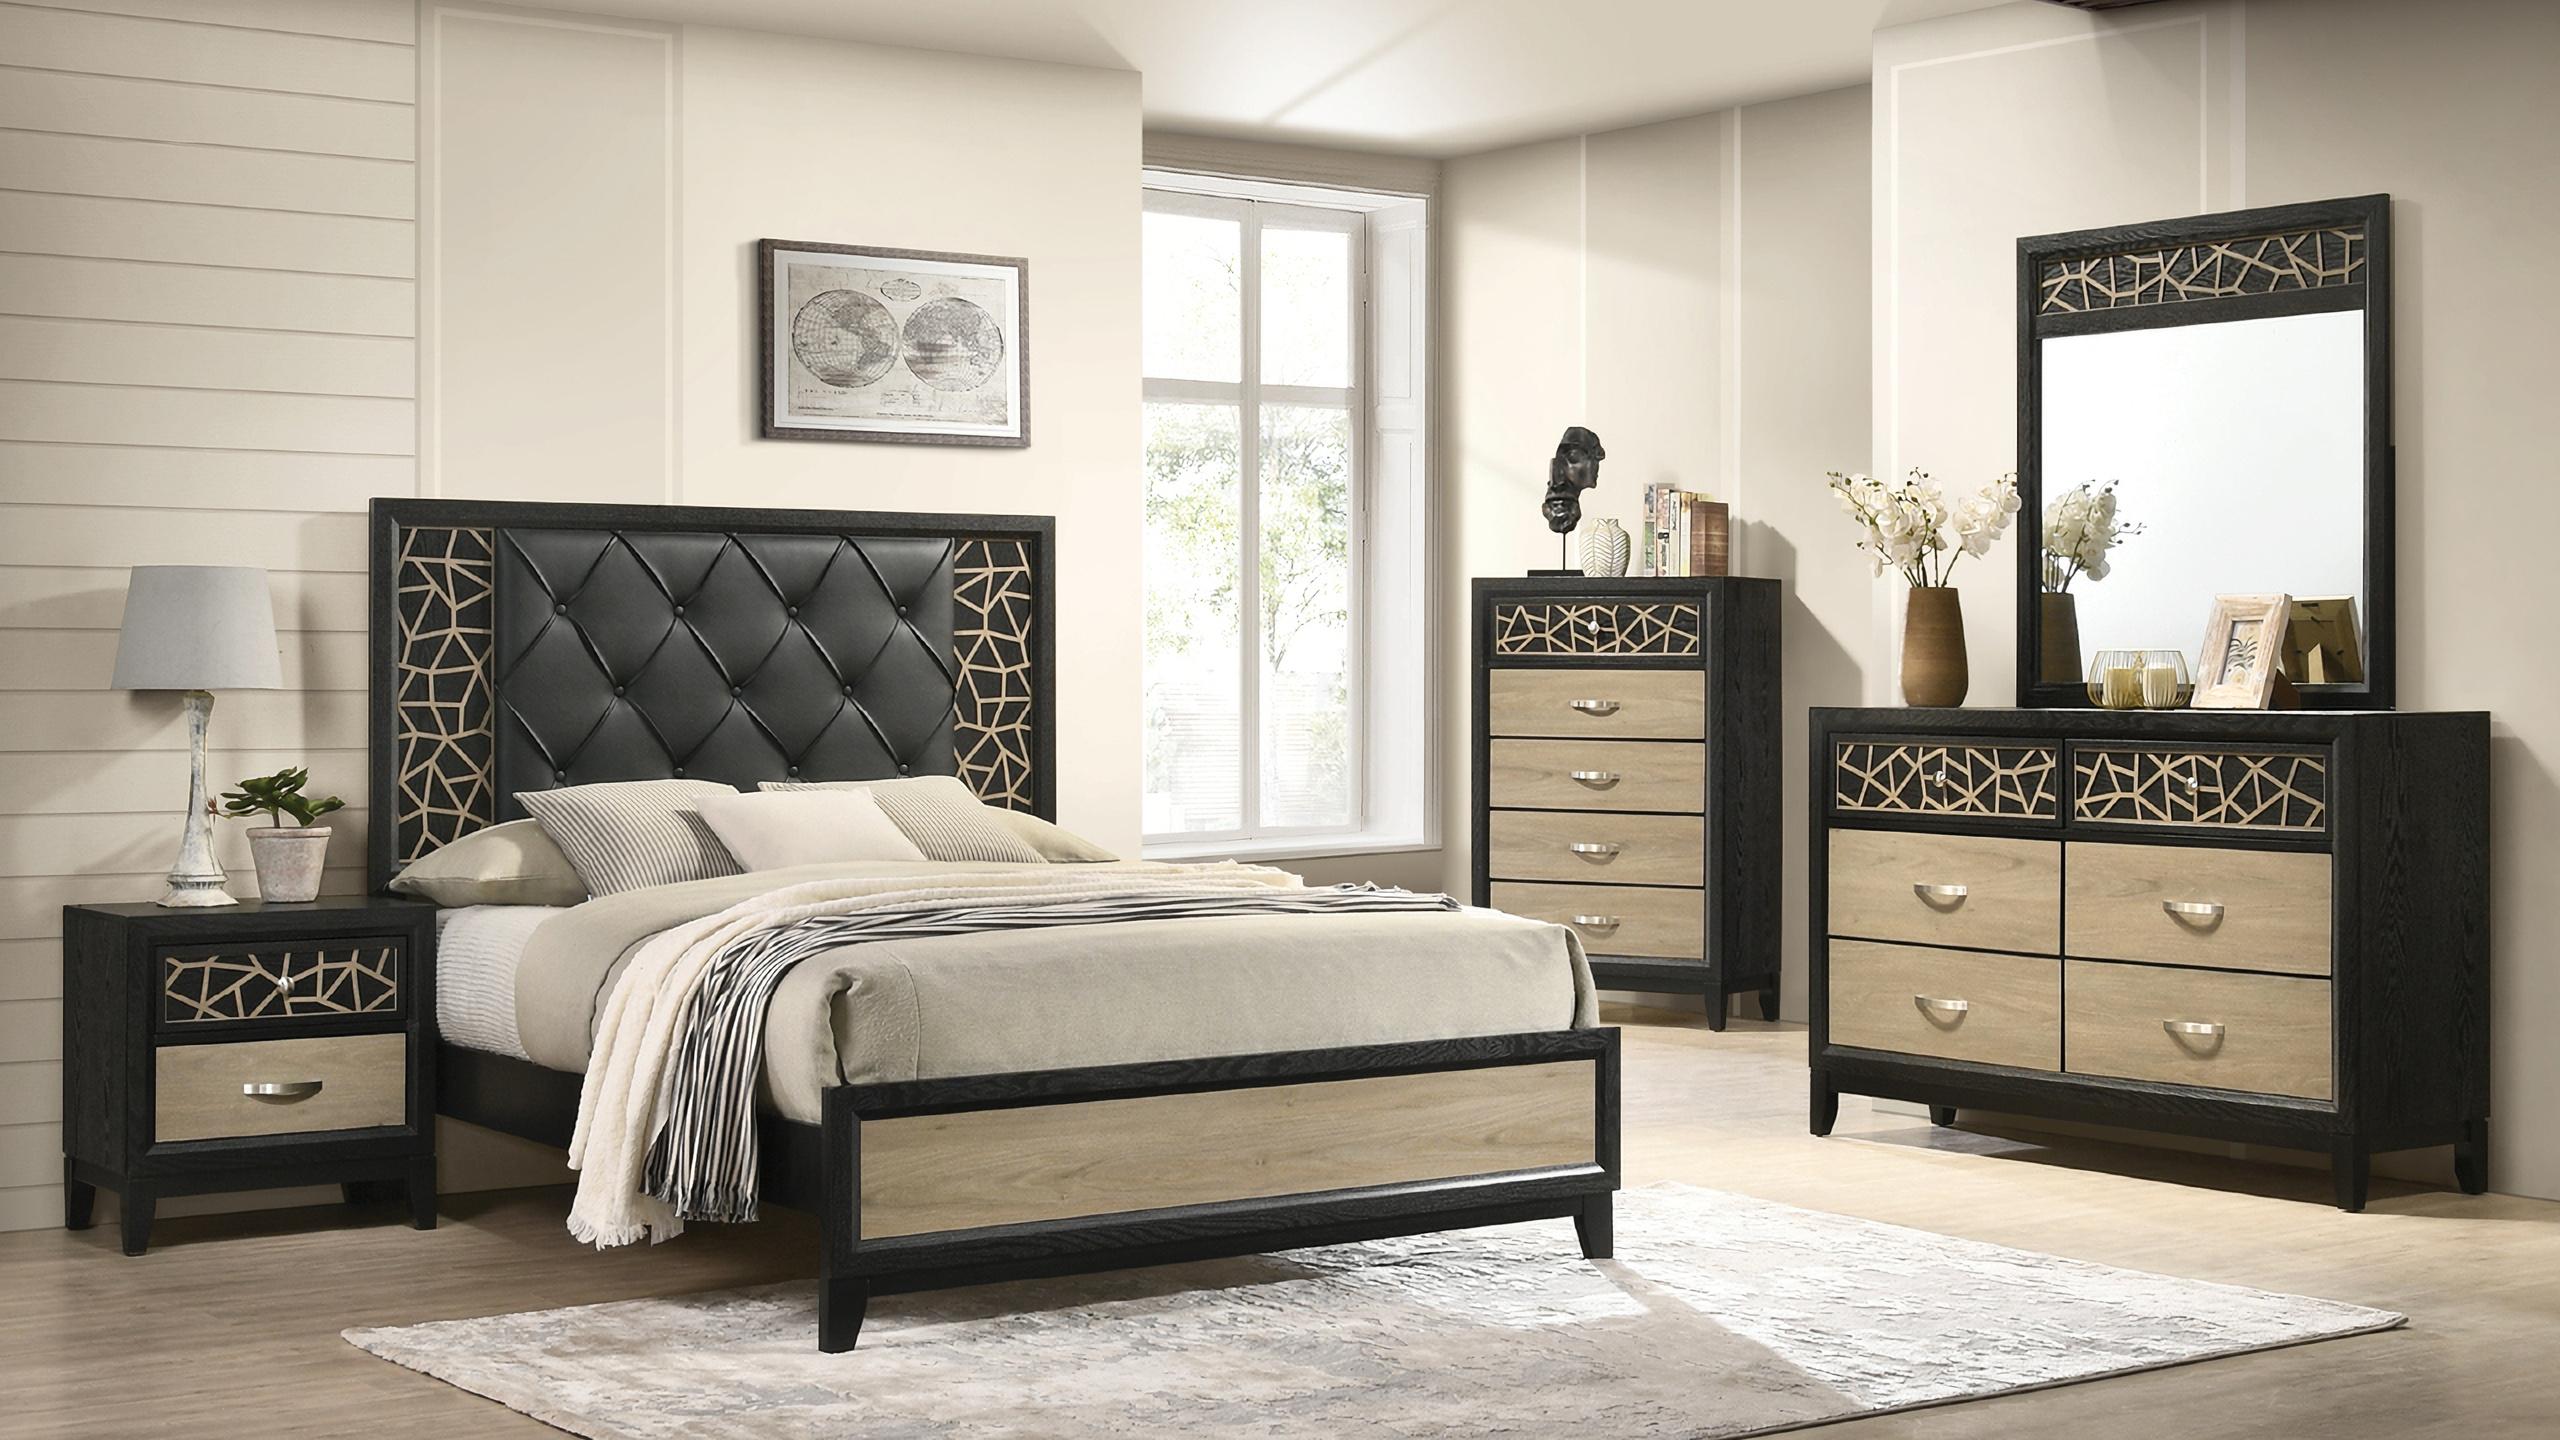 

    
Upholstered King Bed Set 5Pcs with Wooden Pattern In Black Selena Galaxy Home Contemporary
